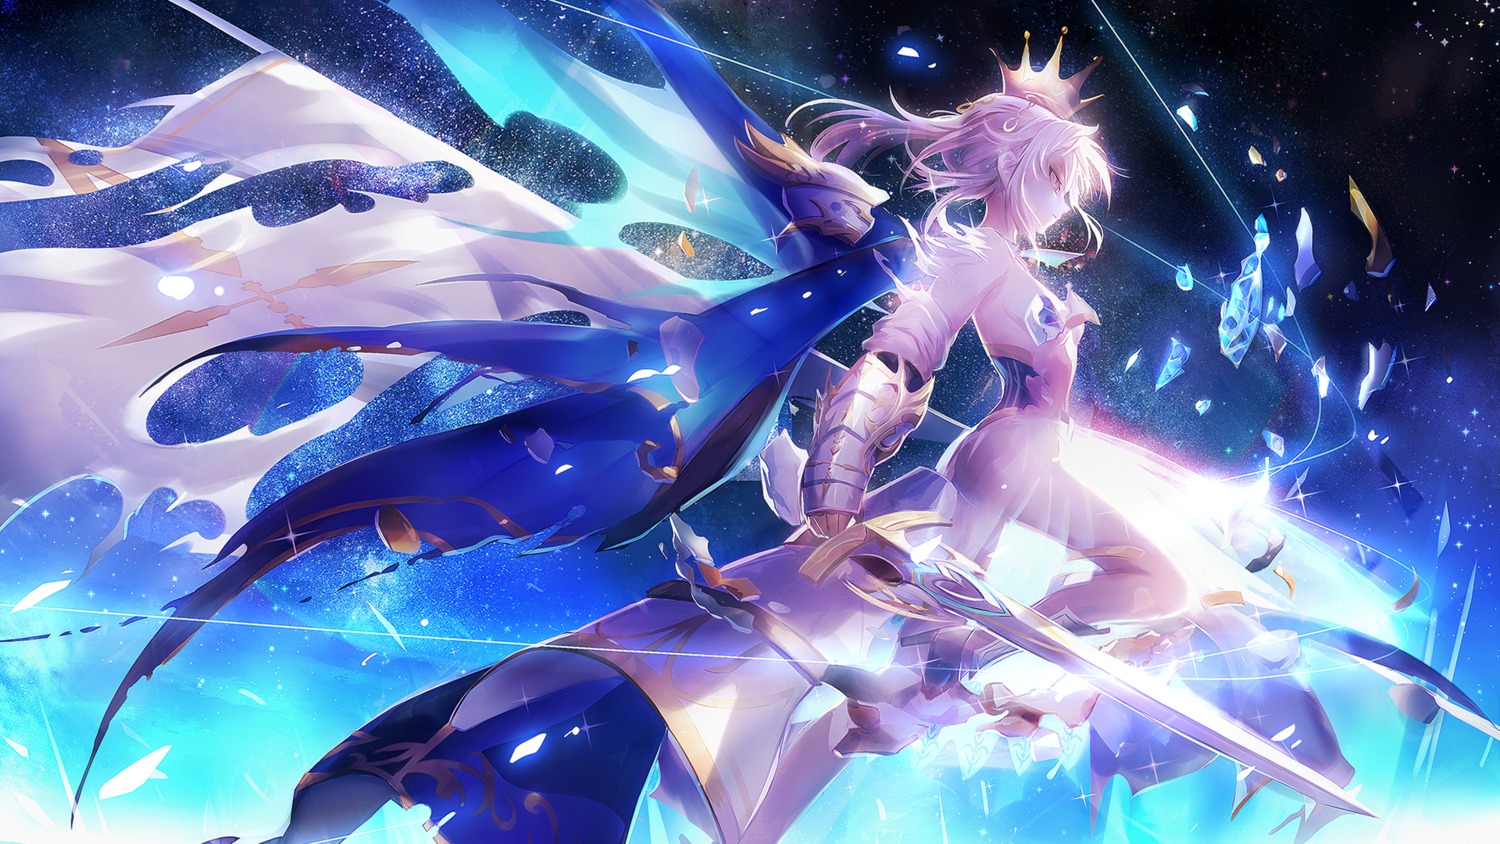 armor clare_(543) dress fate/stay_night no_bra saber see_through sword torn_clothes wallpaper